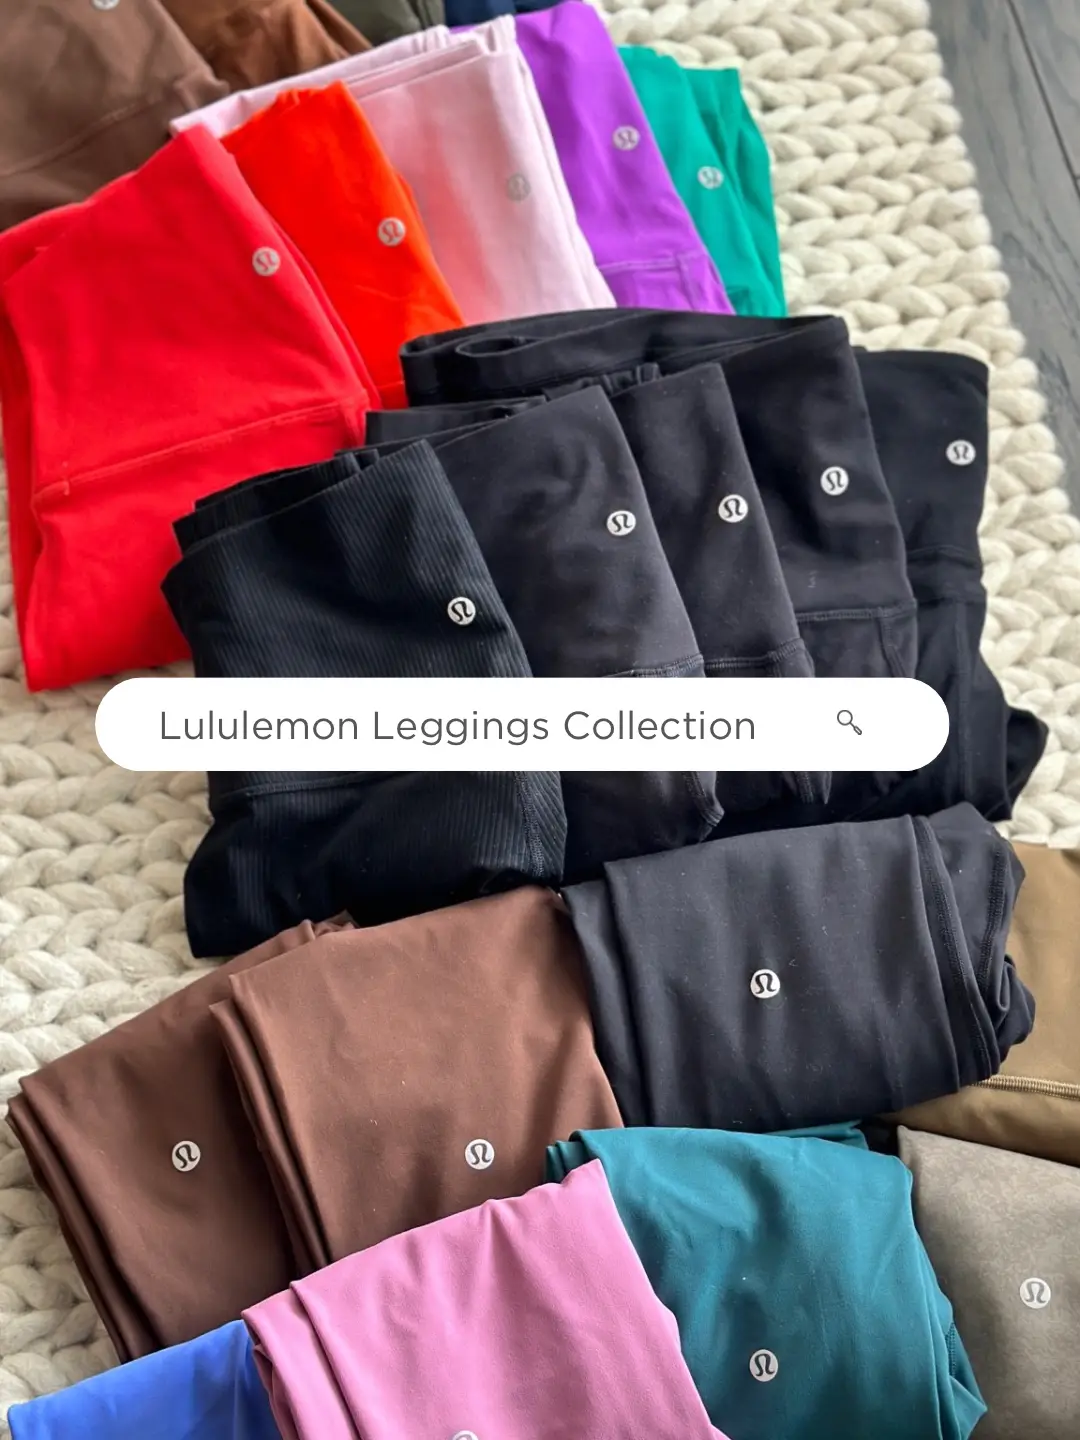 Look at these Nice Lululemon Leggins DHGate Replicas. Get them now at   : r/DHGateRepLadies